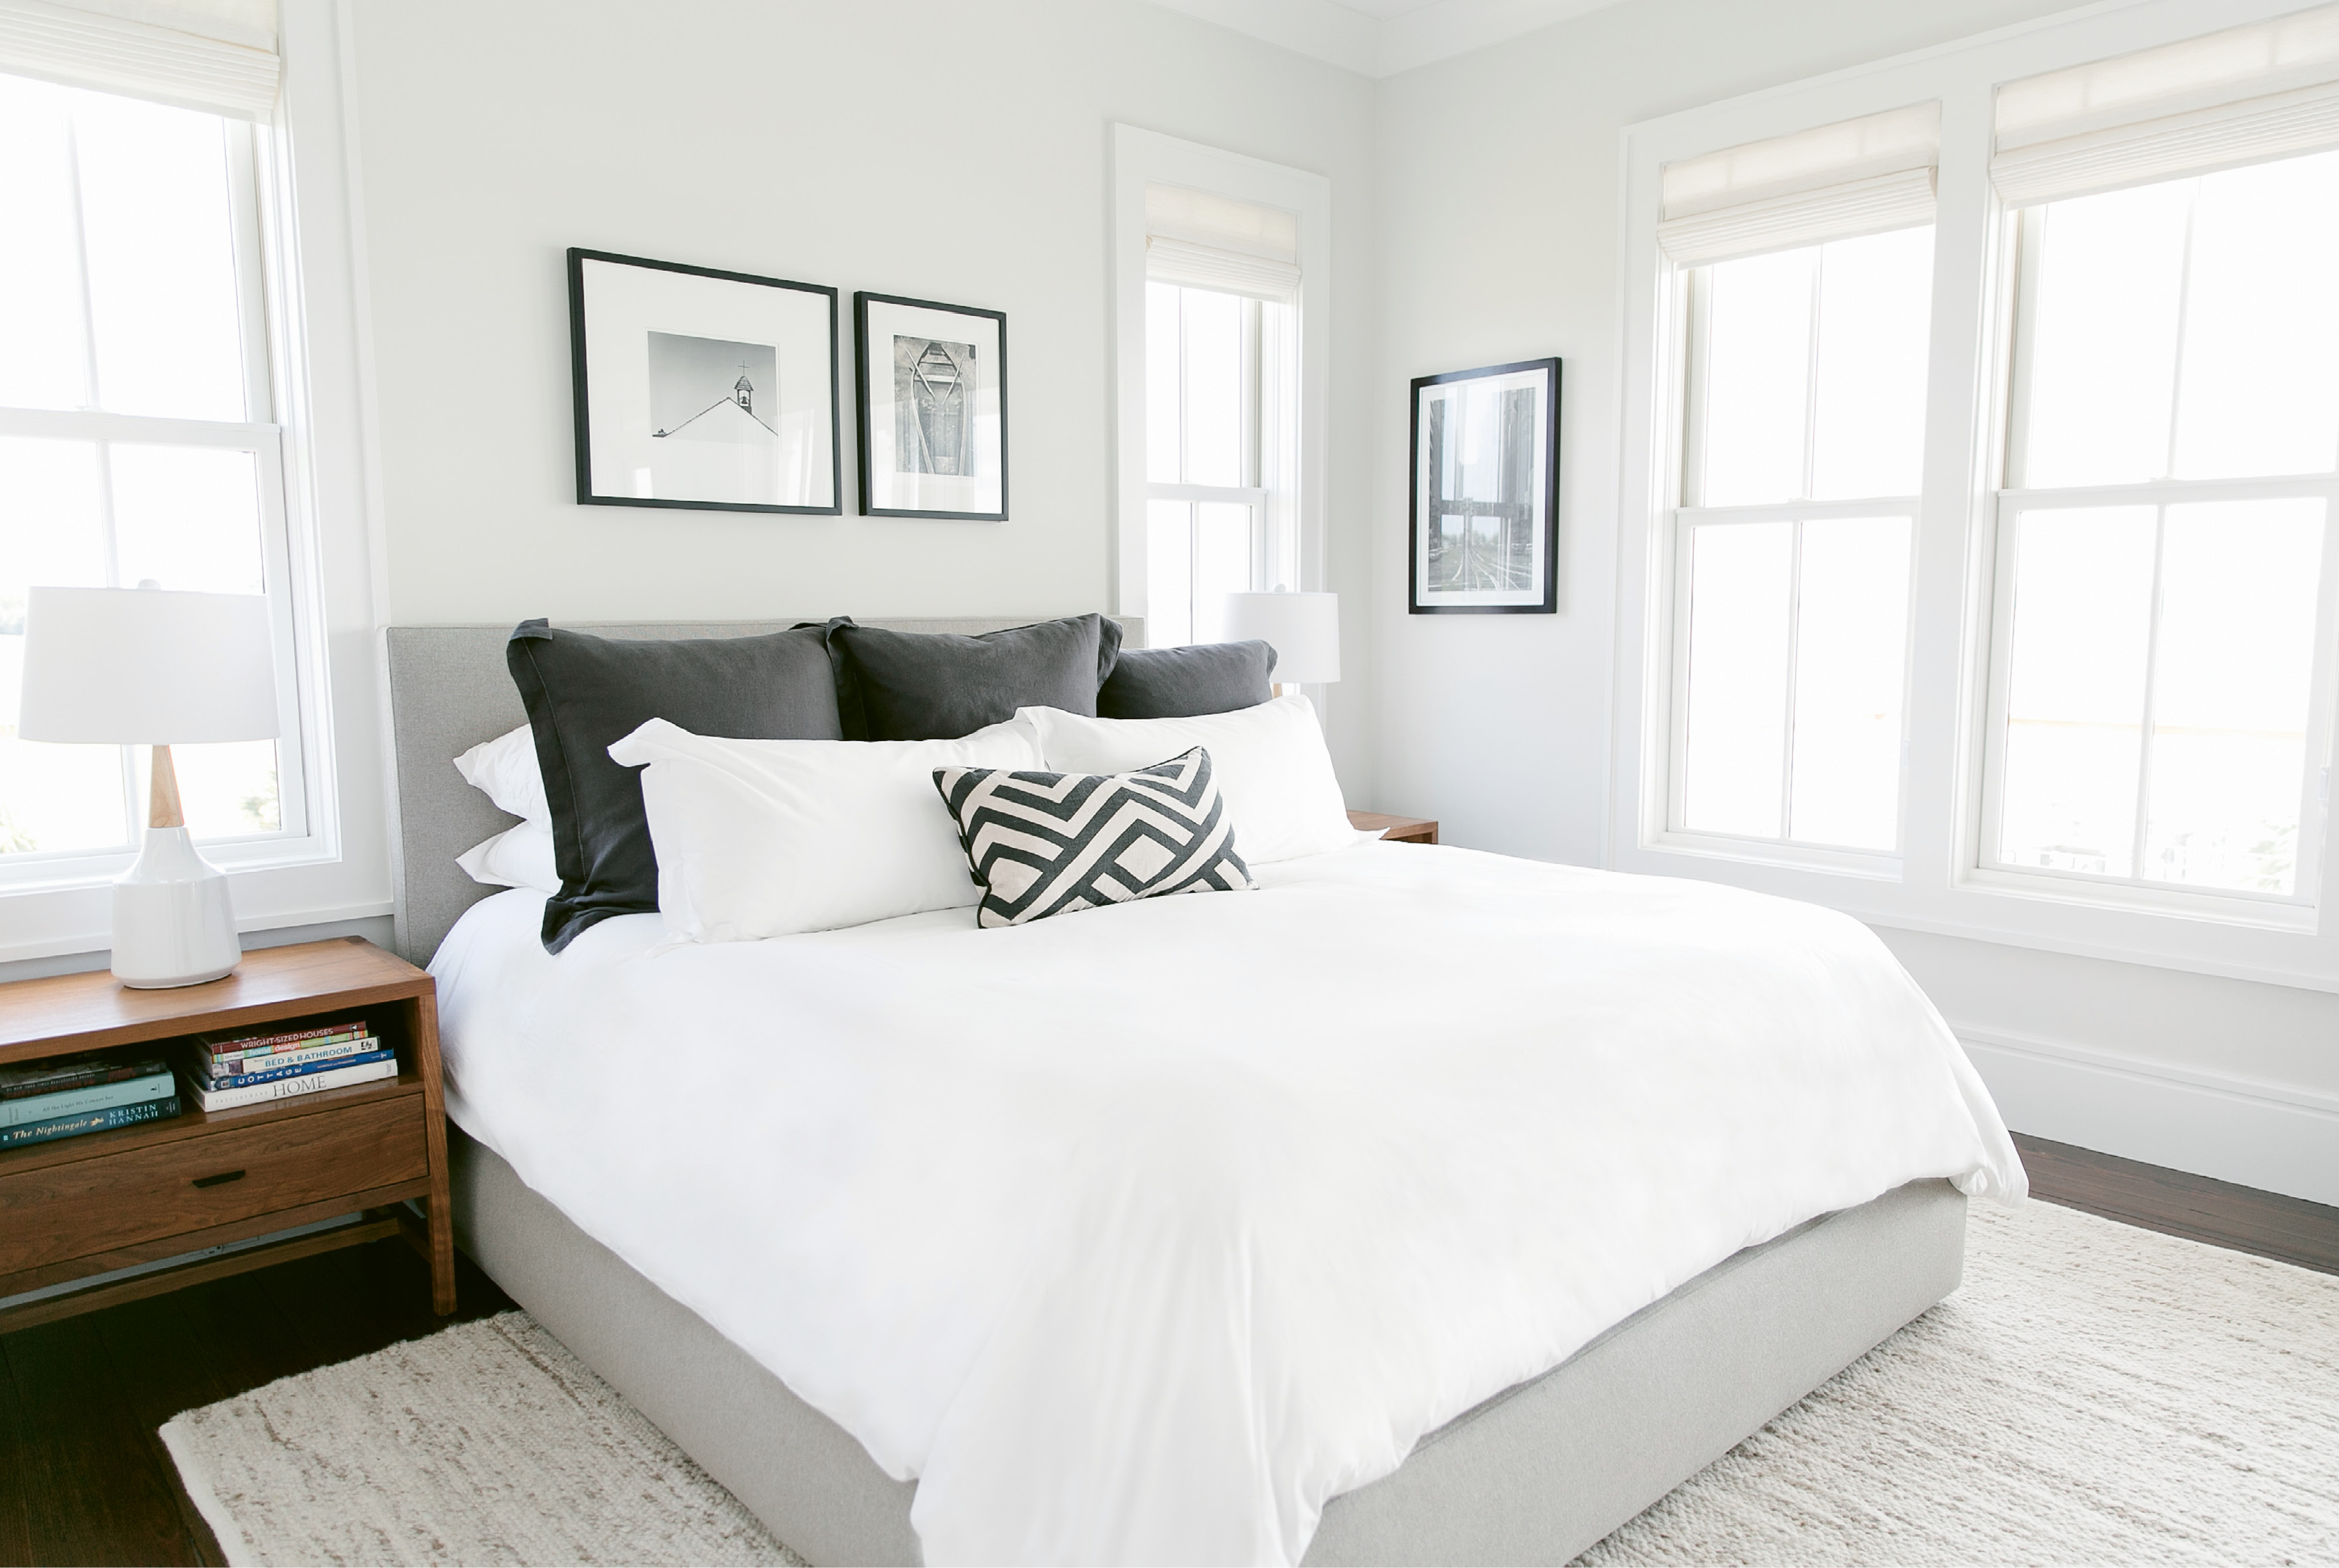 The black-and-white master suite is a soothing retreat from the bright colors and busy patterns Melissa often sees as an interior designer.